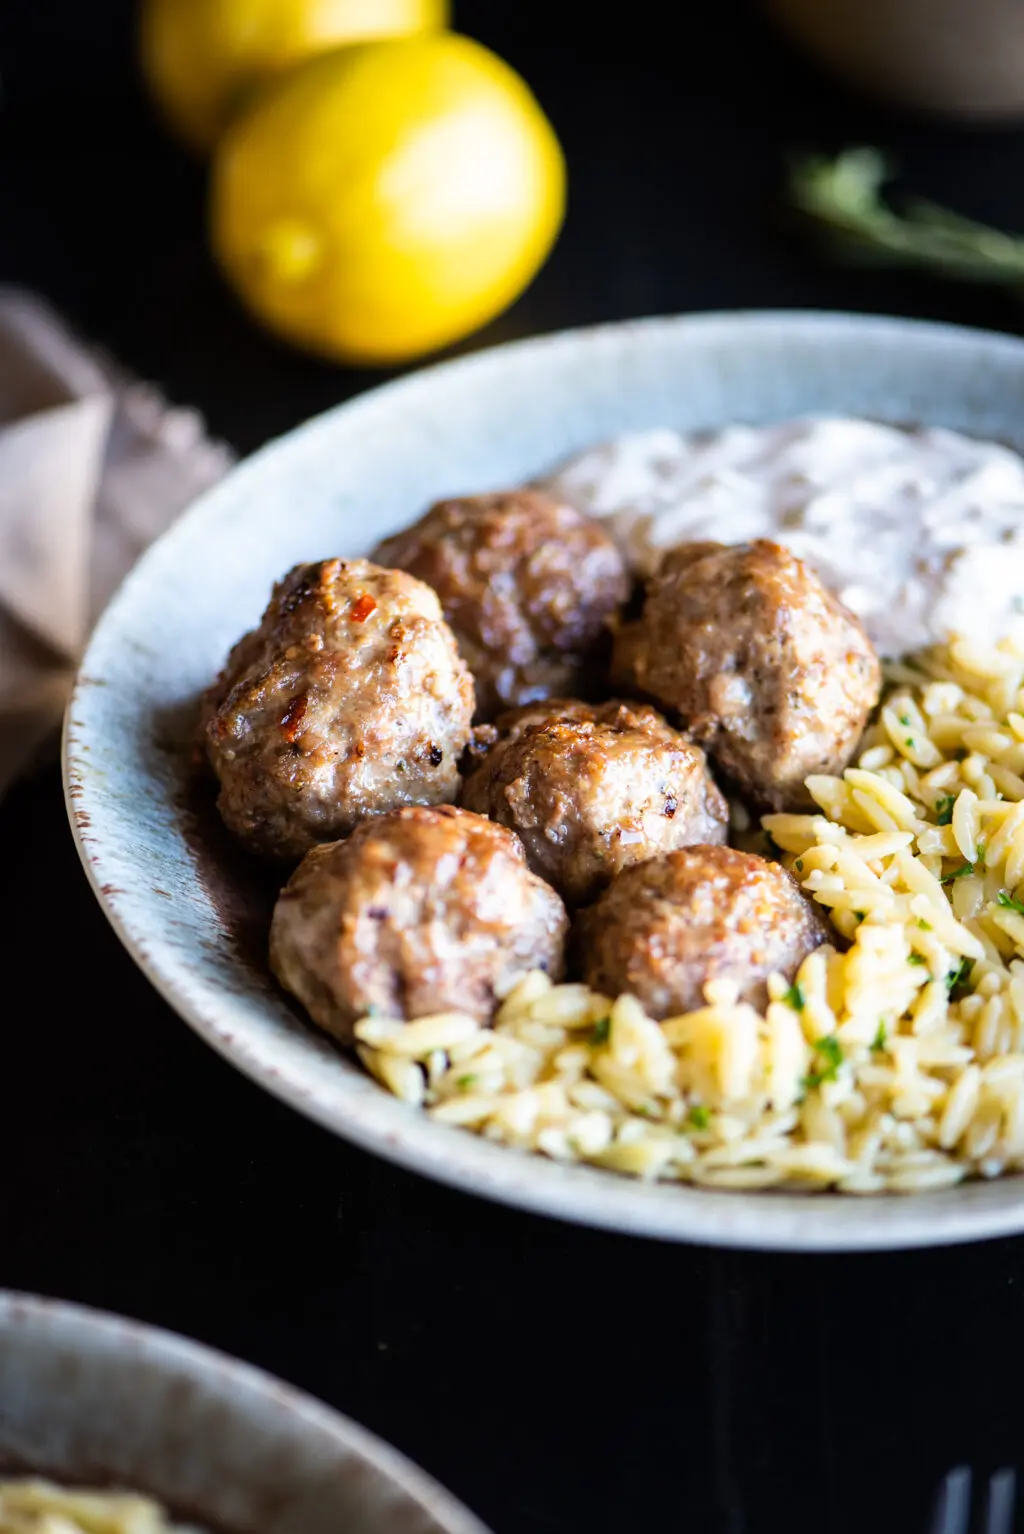 Lamb meatballs with lemons in the background